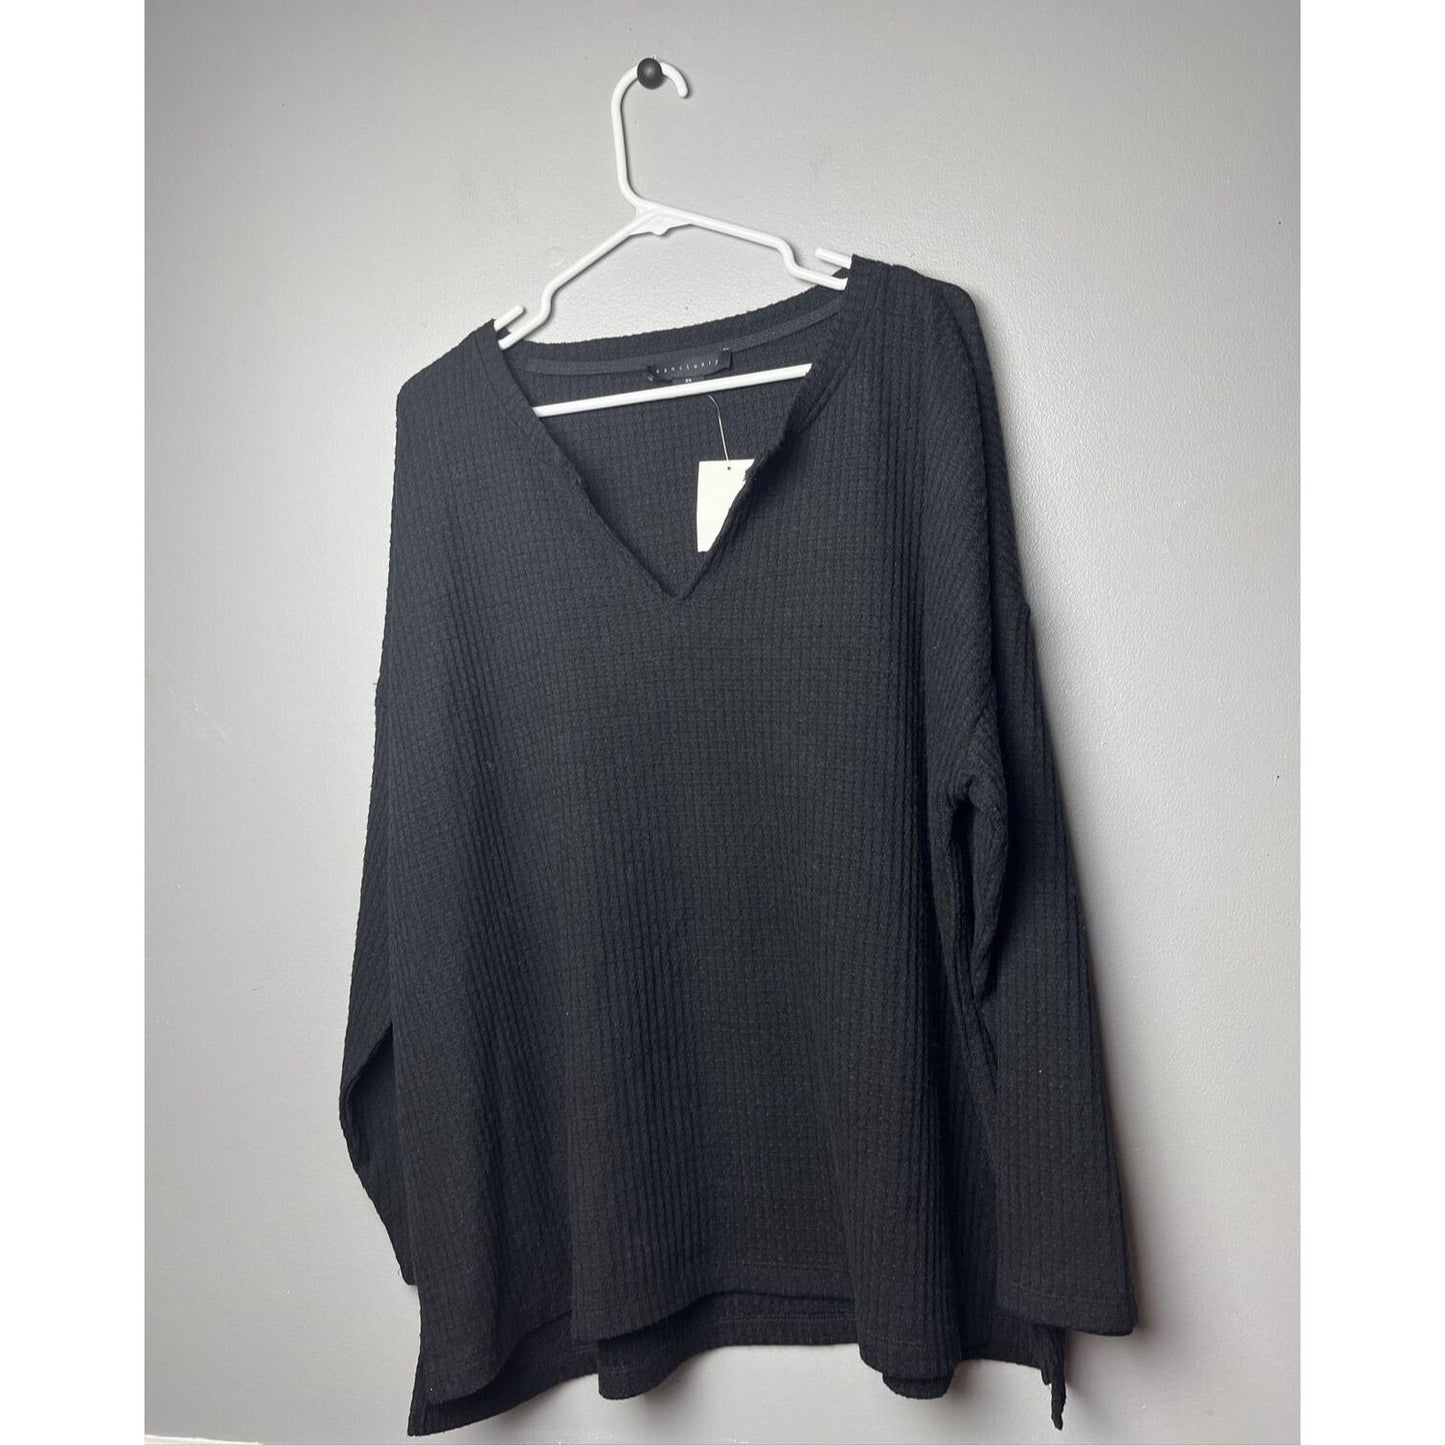 Social Standard by Sanctuary Ladies Camille Waffle Top Size 2X Black